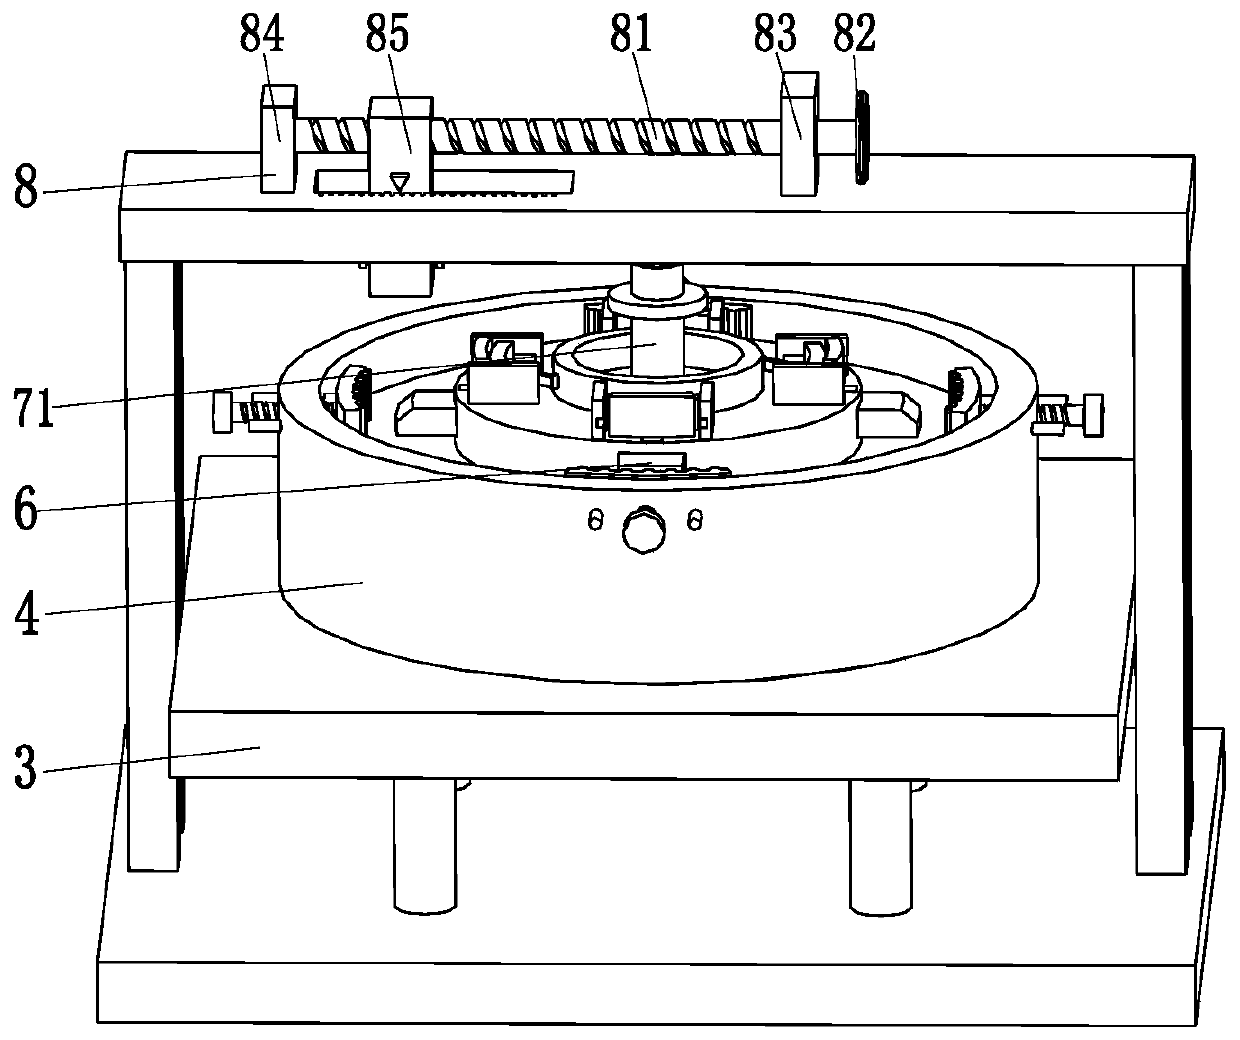 Ultra-low temperature ball valve seat machining device